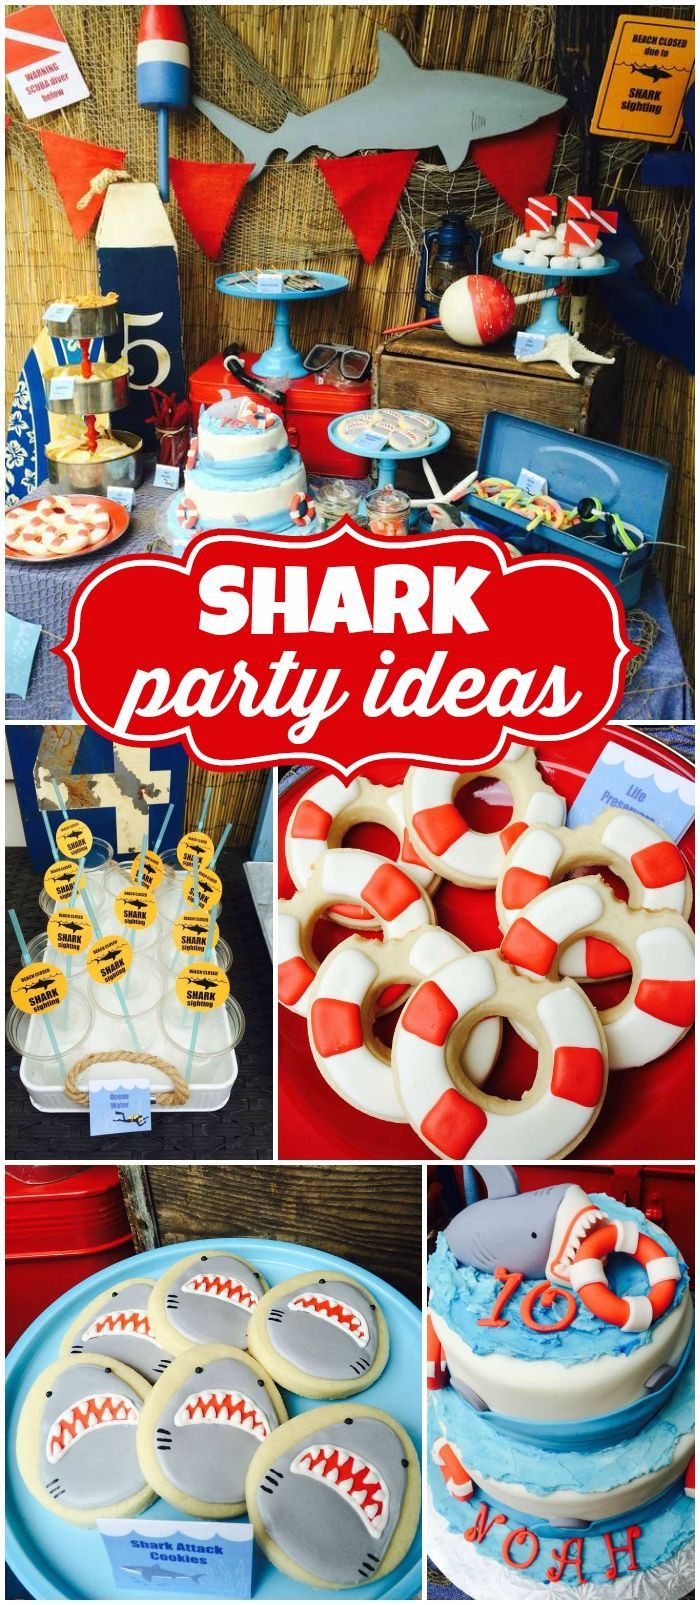 Toddler Summer Birthday Party Ideas
 How cool is this shark themed party Perfect for summer